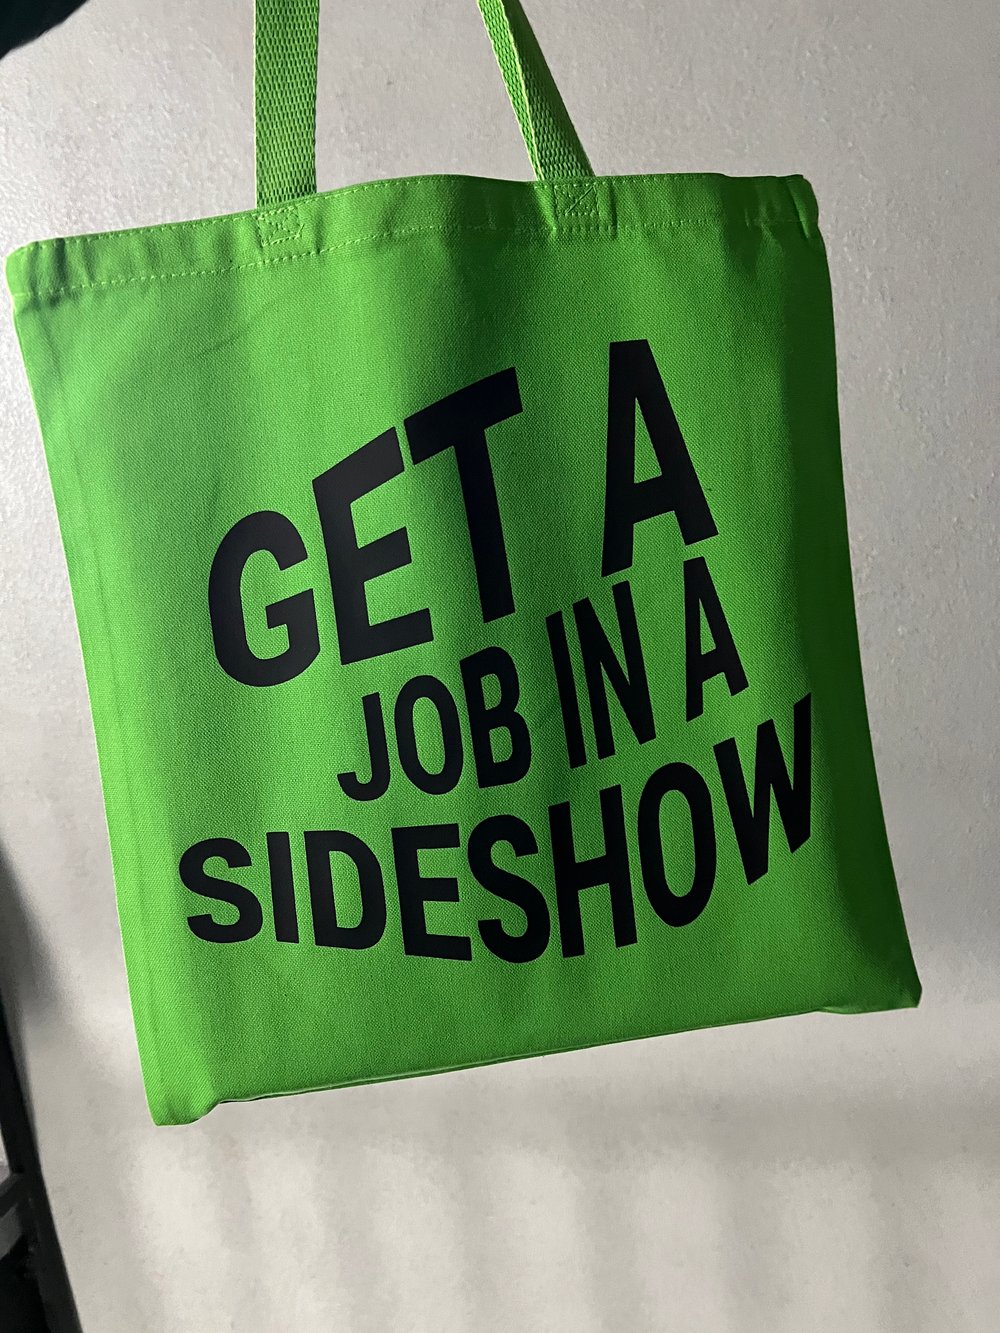 get a job in a sideshow 🤪🤪